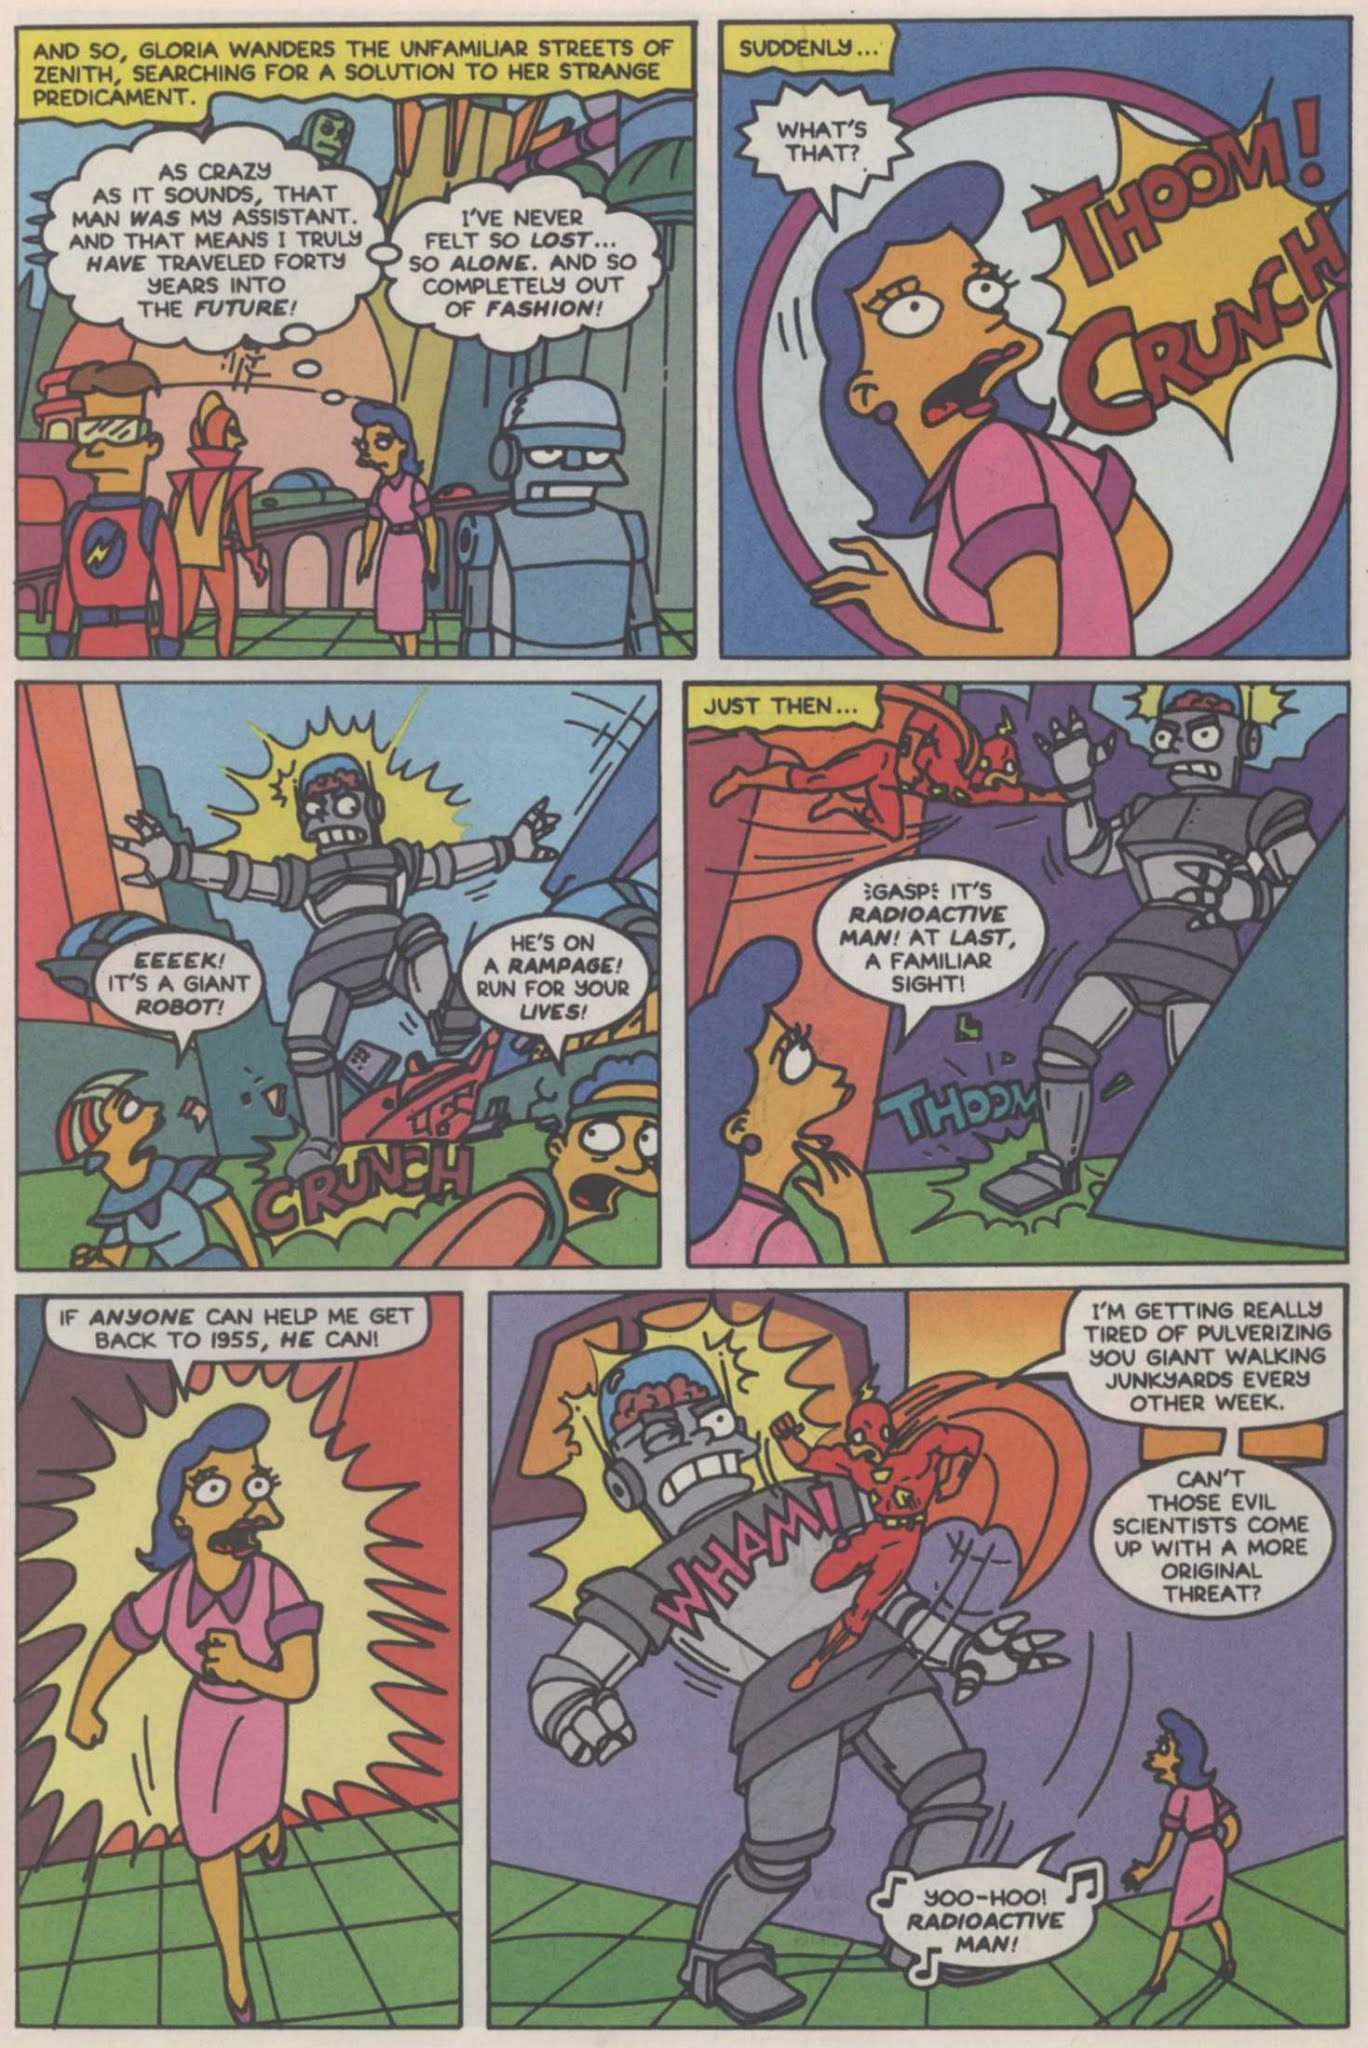 Read online Radioactive Man 80 pg. Colossal comic -  Issue # Full - 65